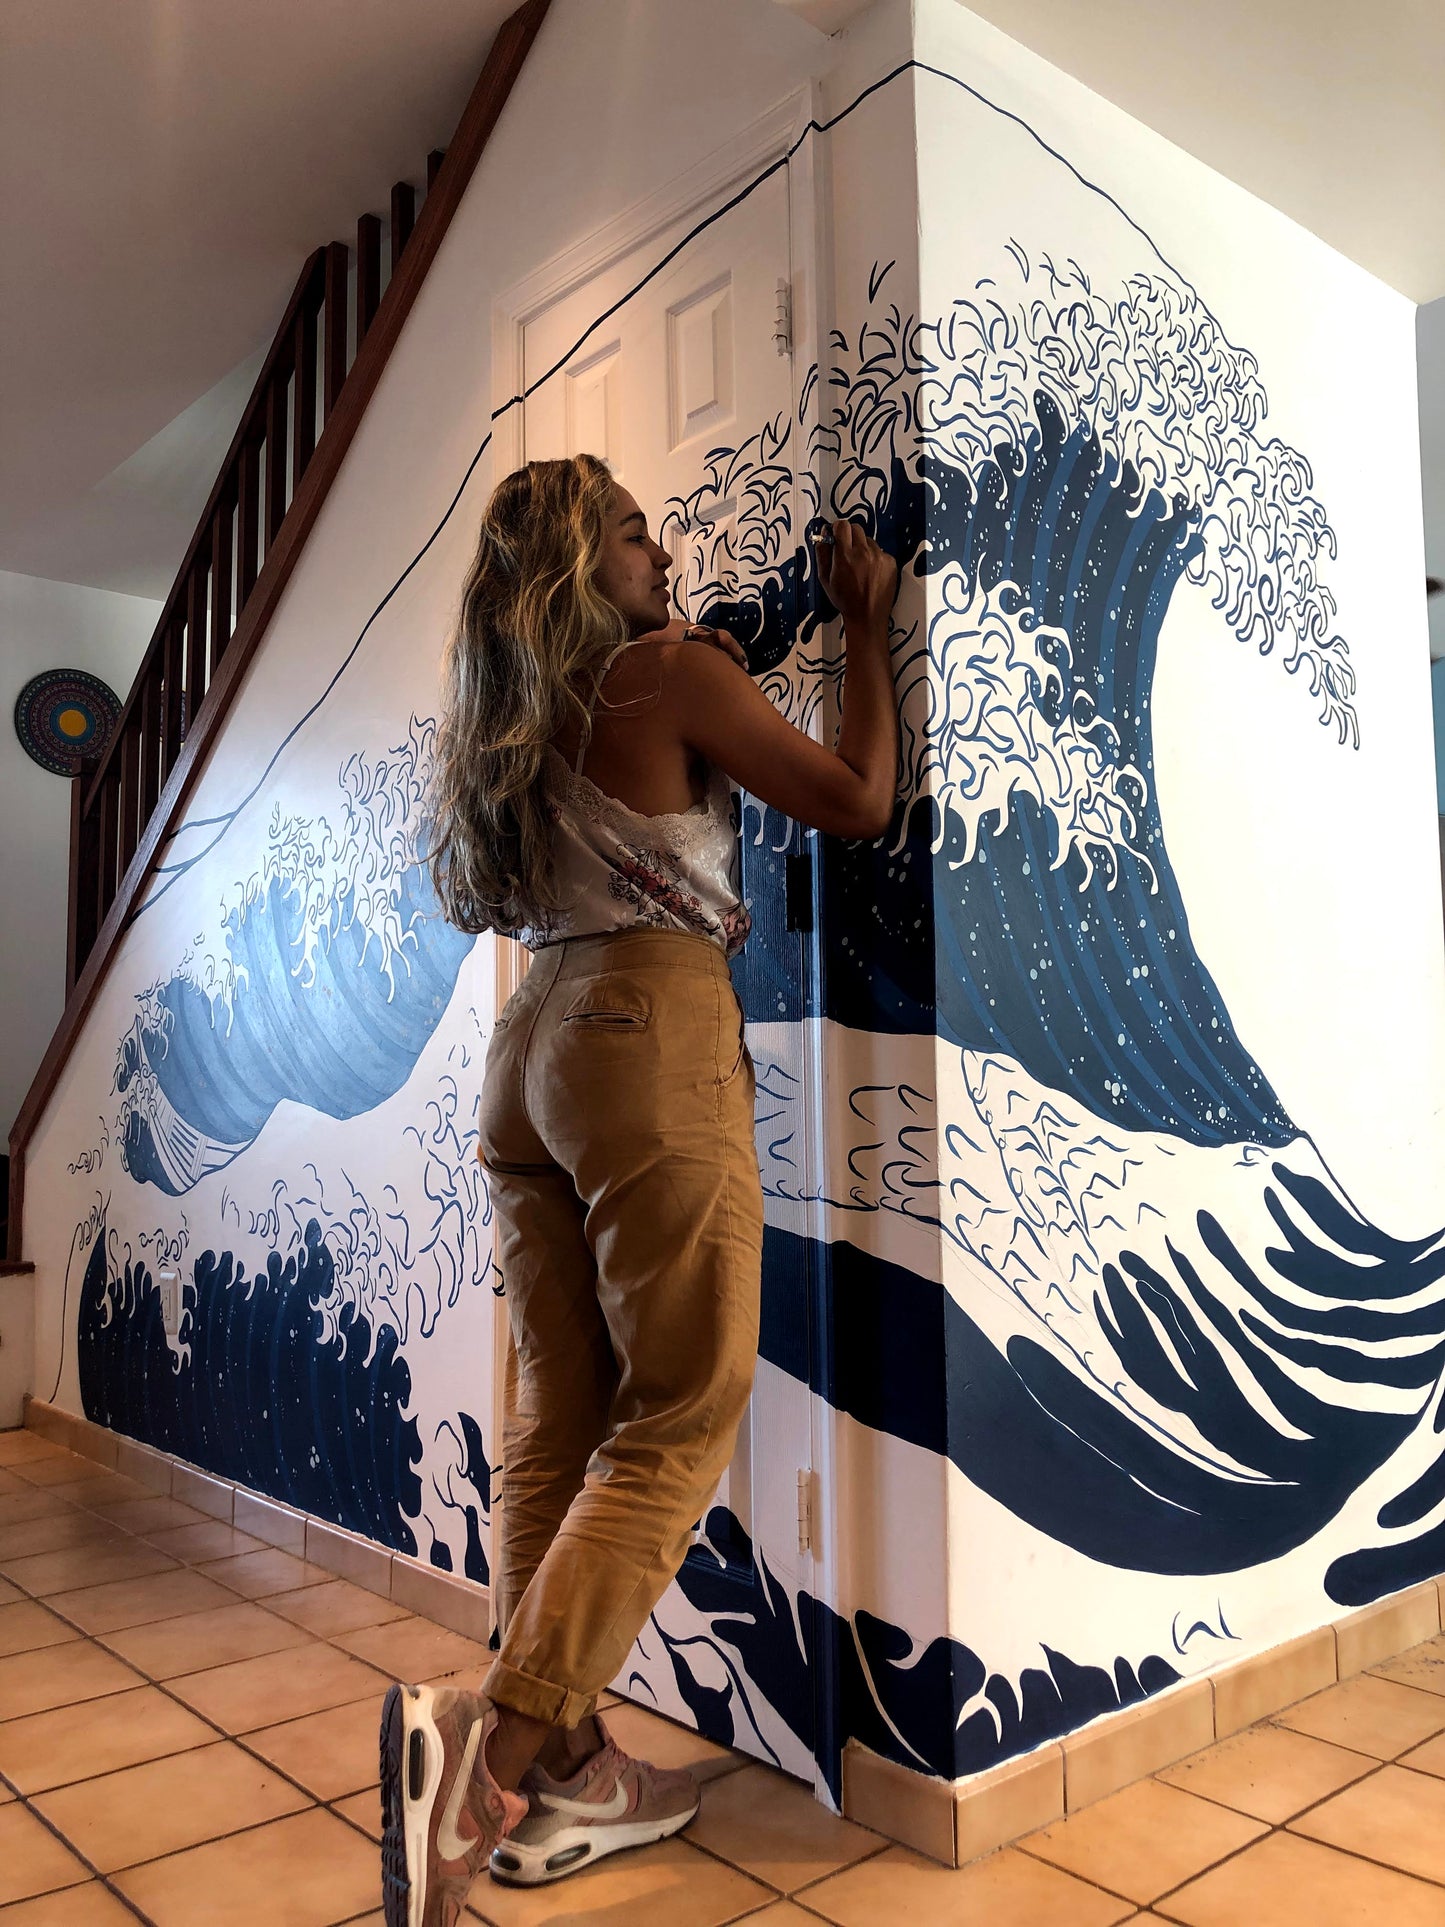 The Blue Wave Mural